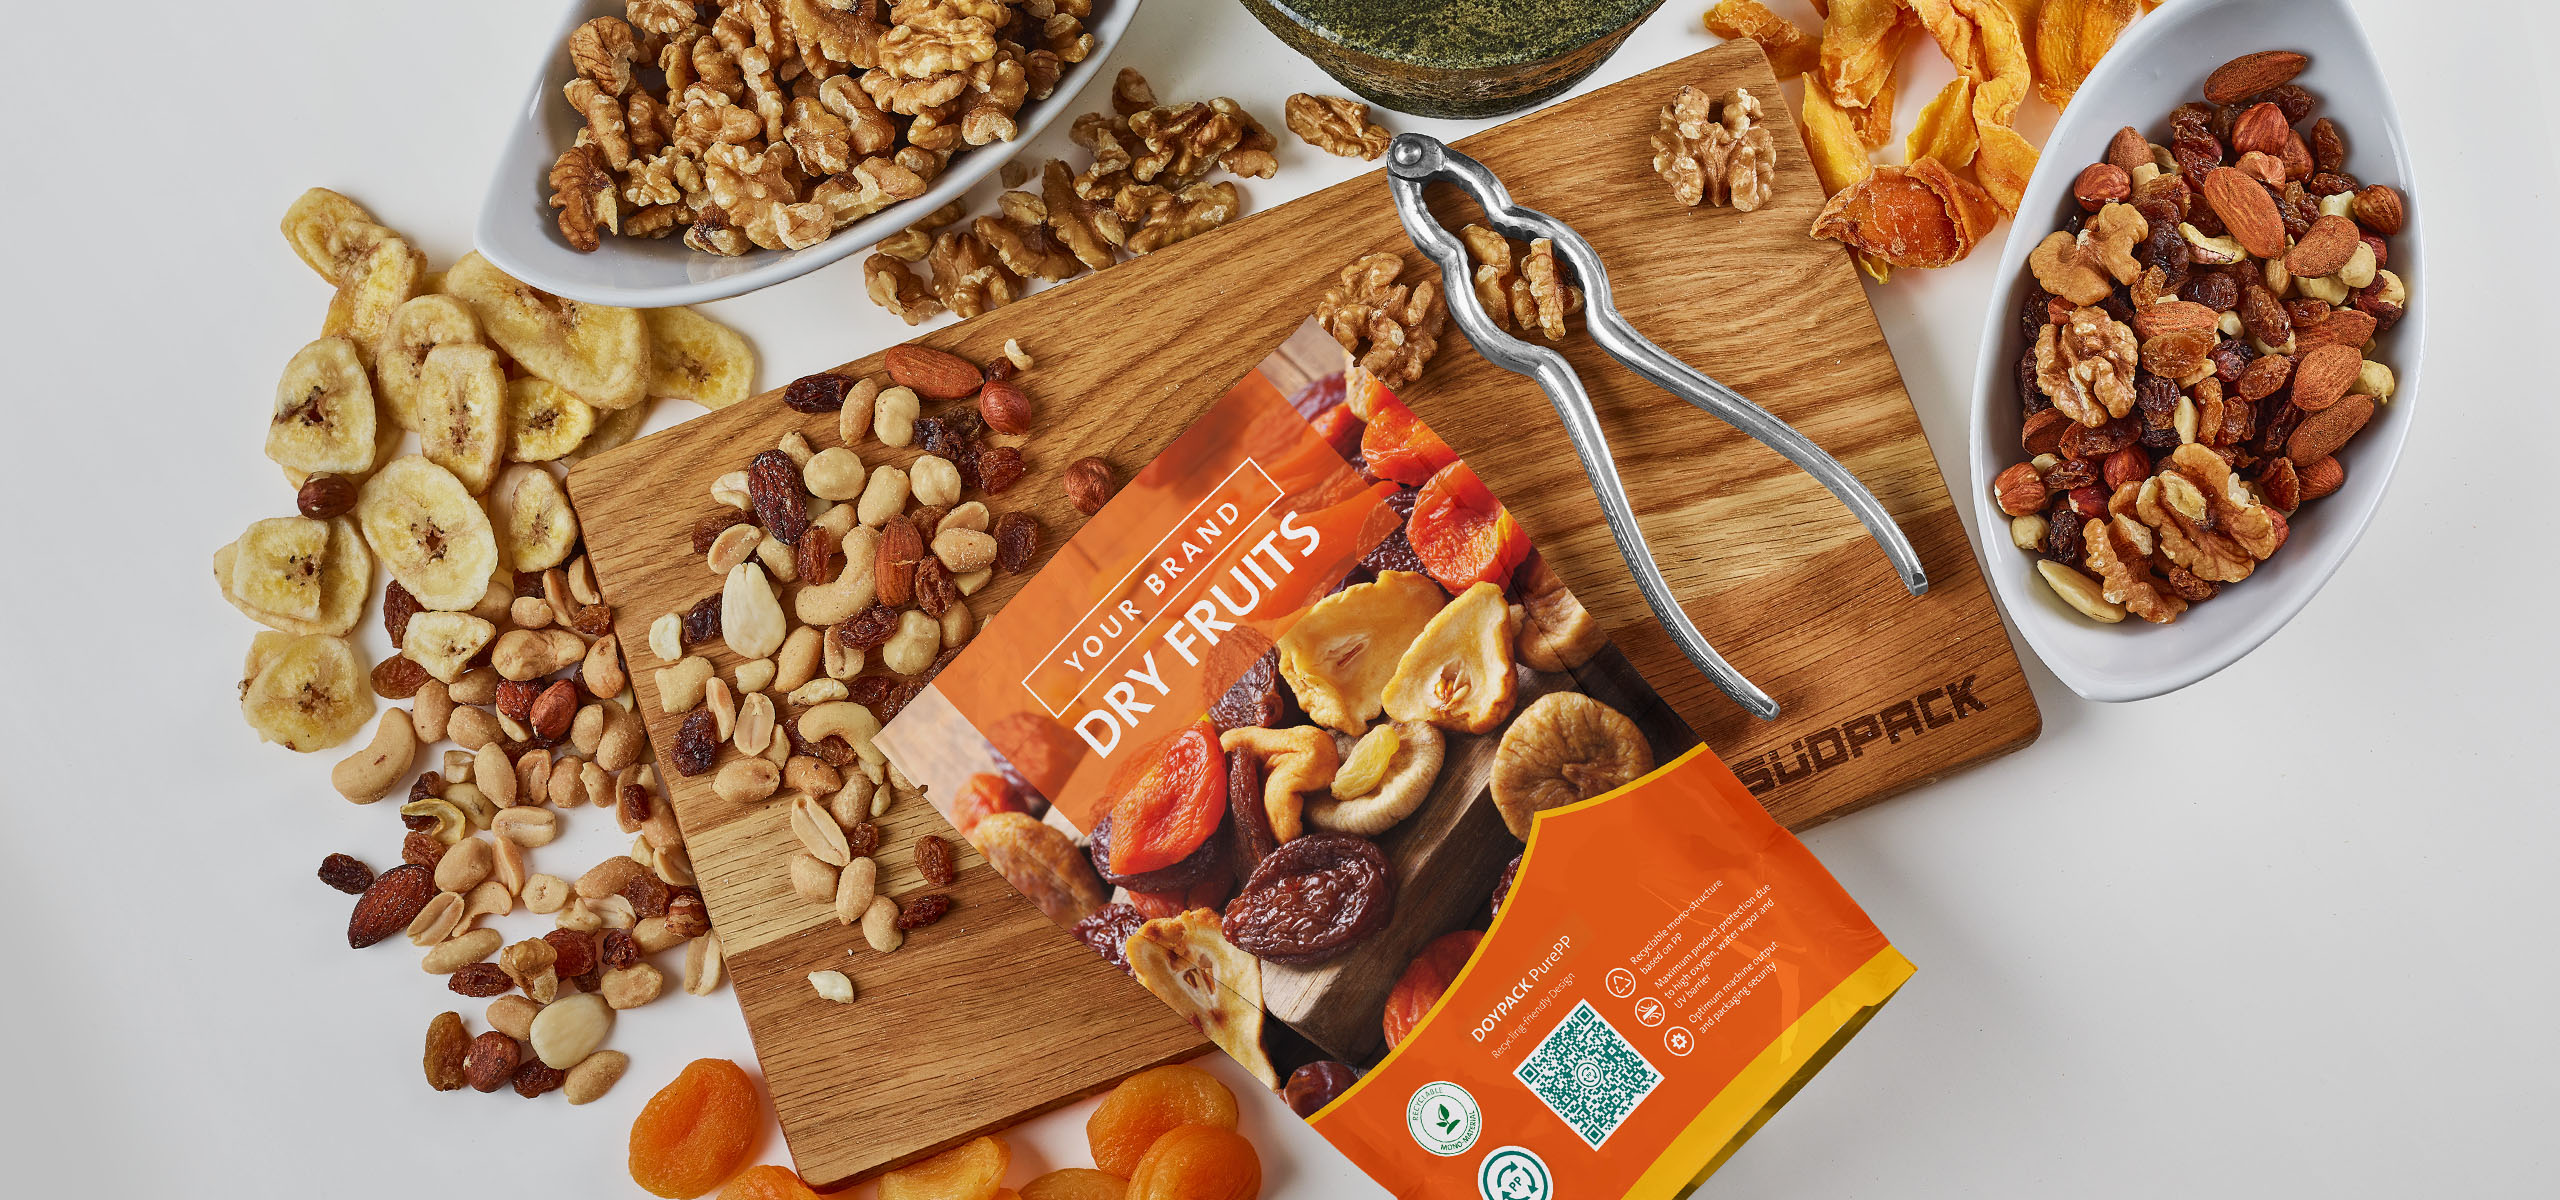 Doypack packaging with dried fruits